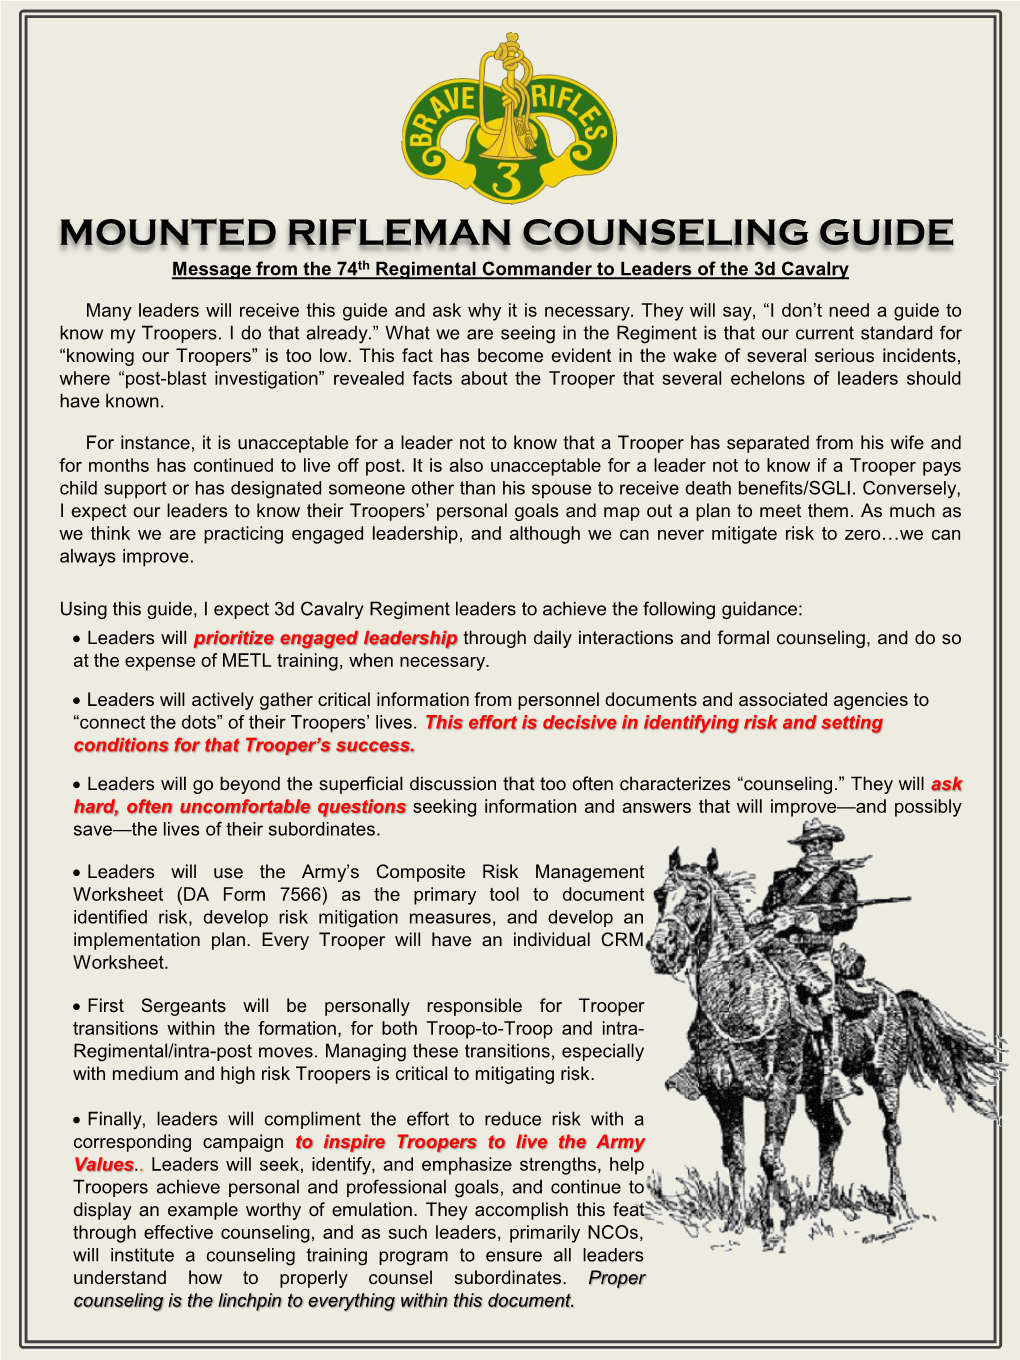 MOUNTED RIFLEMAN COUNSELING GUIDE Message from the 74Th Regimental Commander to Leaders of the 3D Cavalry